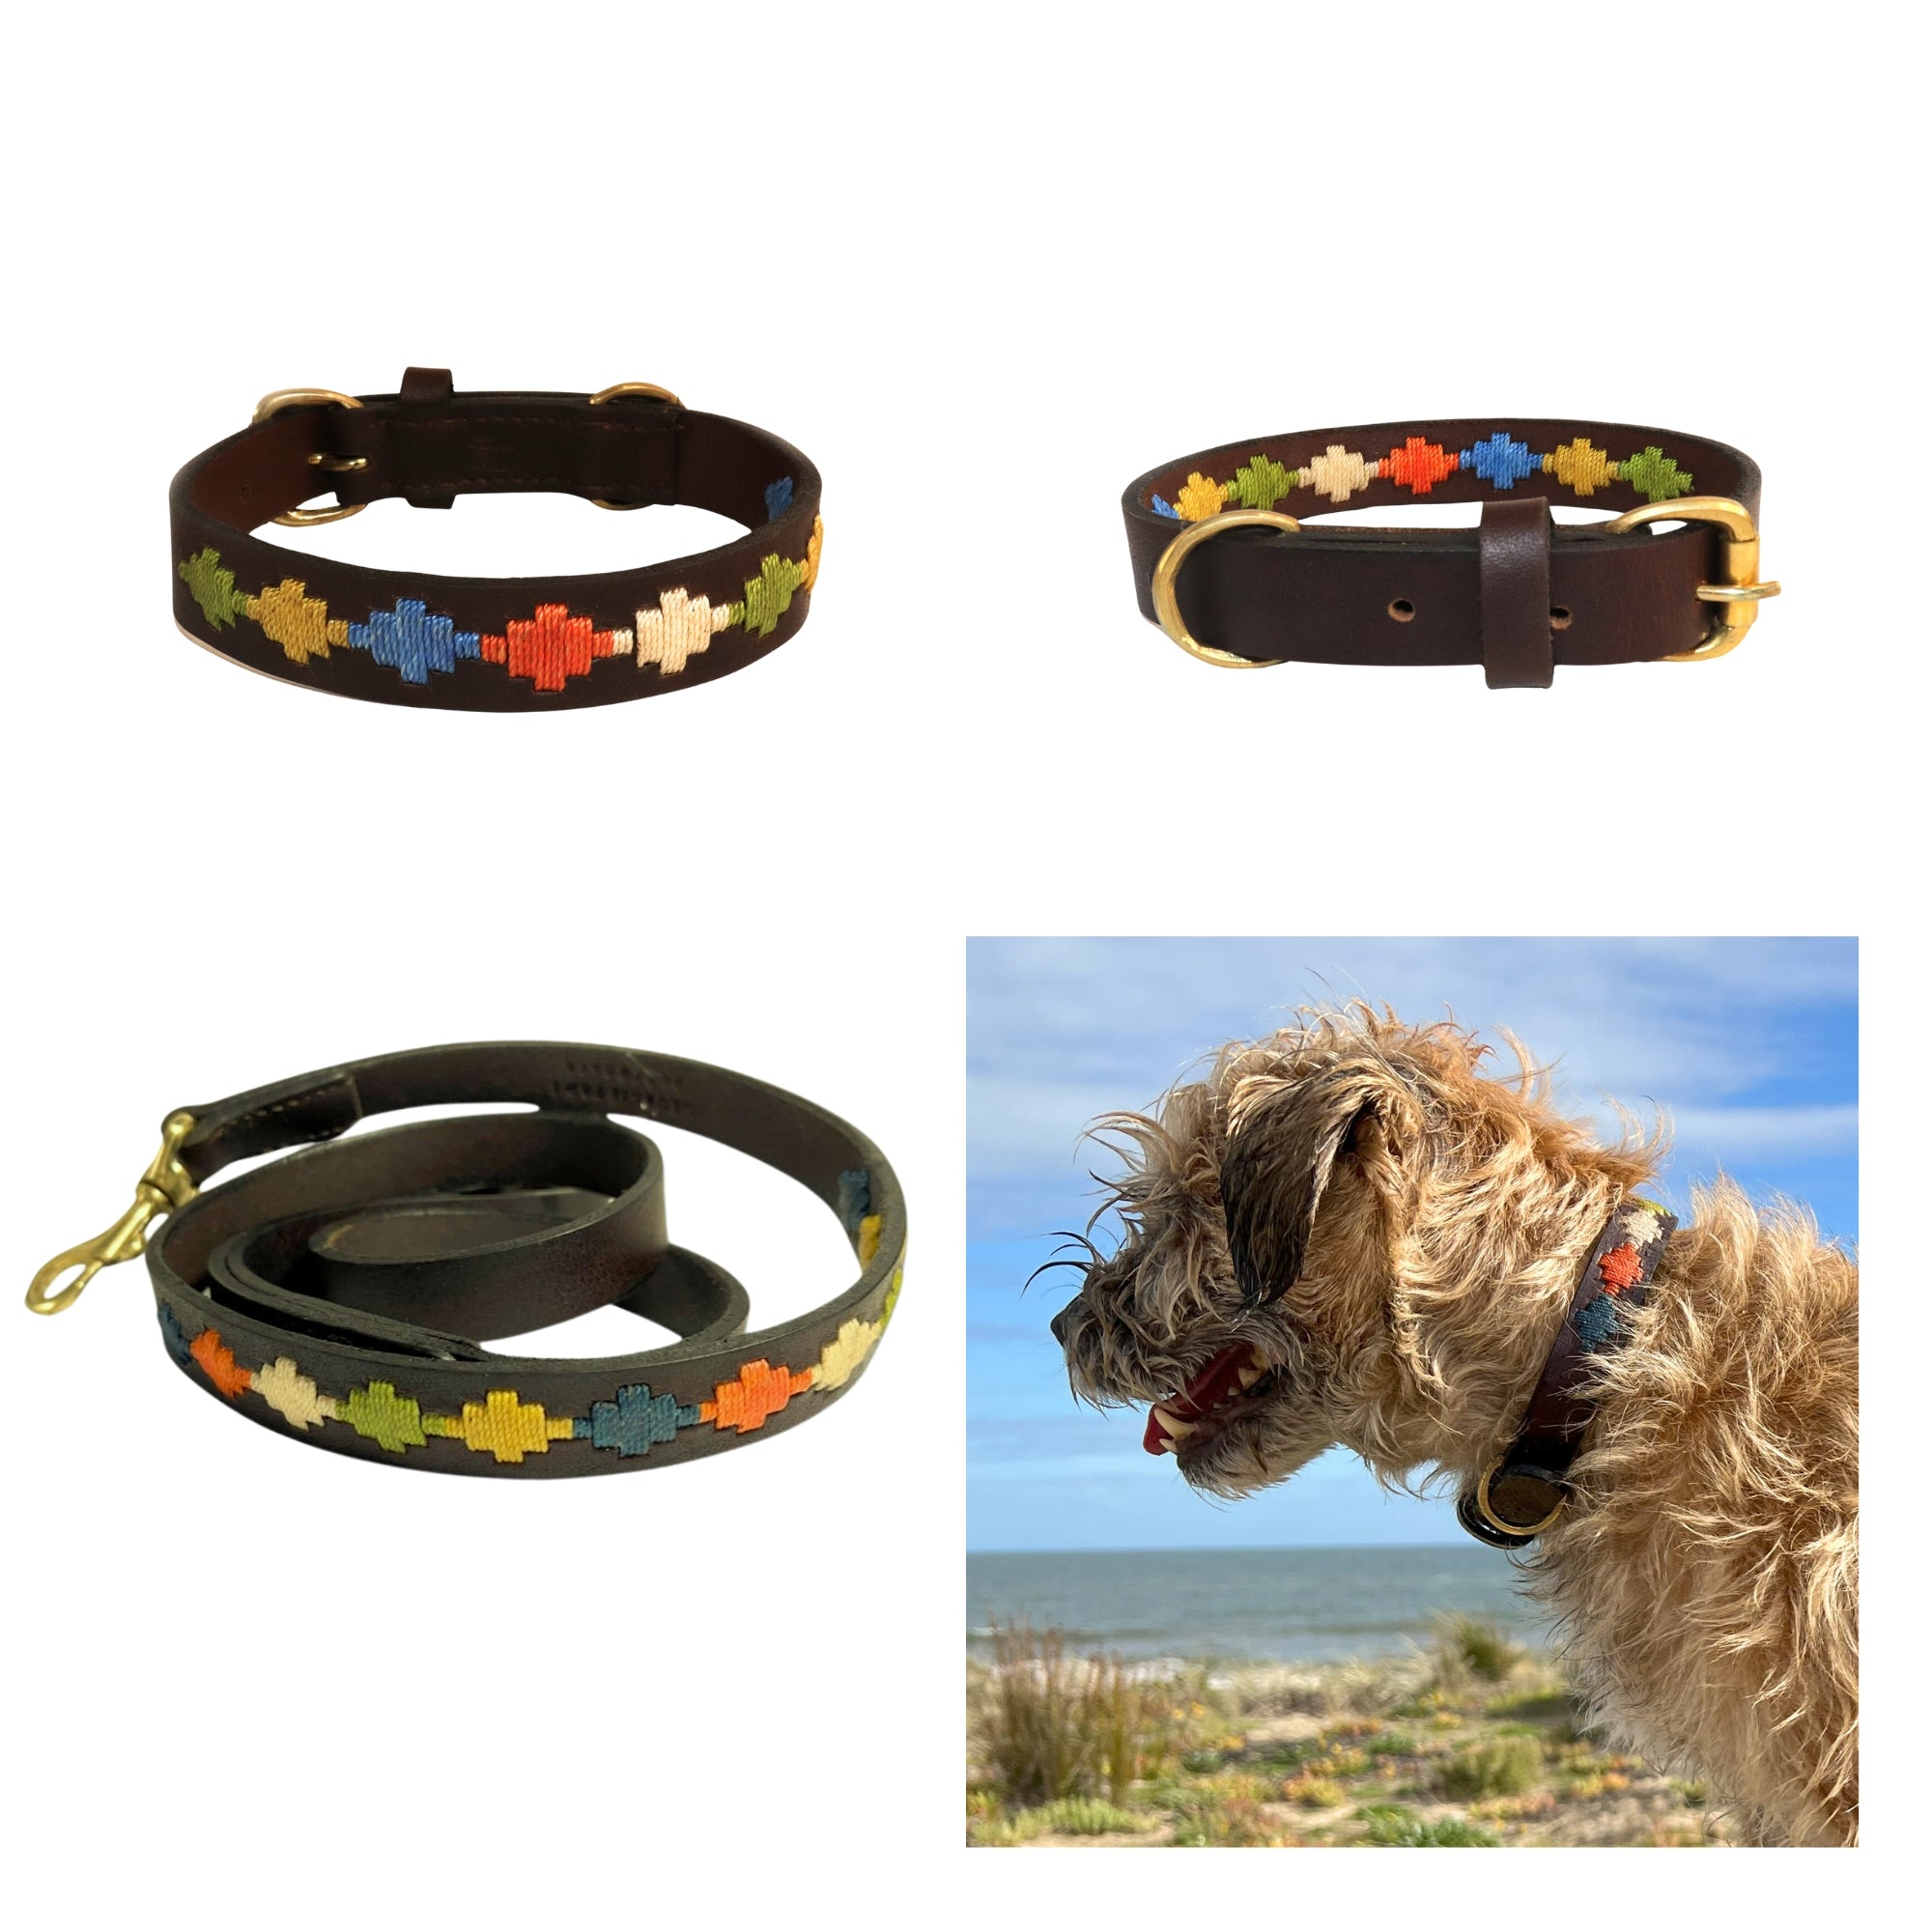 Four images: three different Polo Bark Collars by Georgie Paws with colorful paw print designs, and a scruffy dog wearing a similar collar at a sunny beach, looking playful.